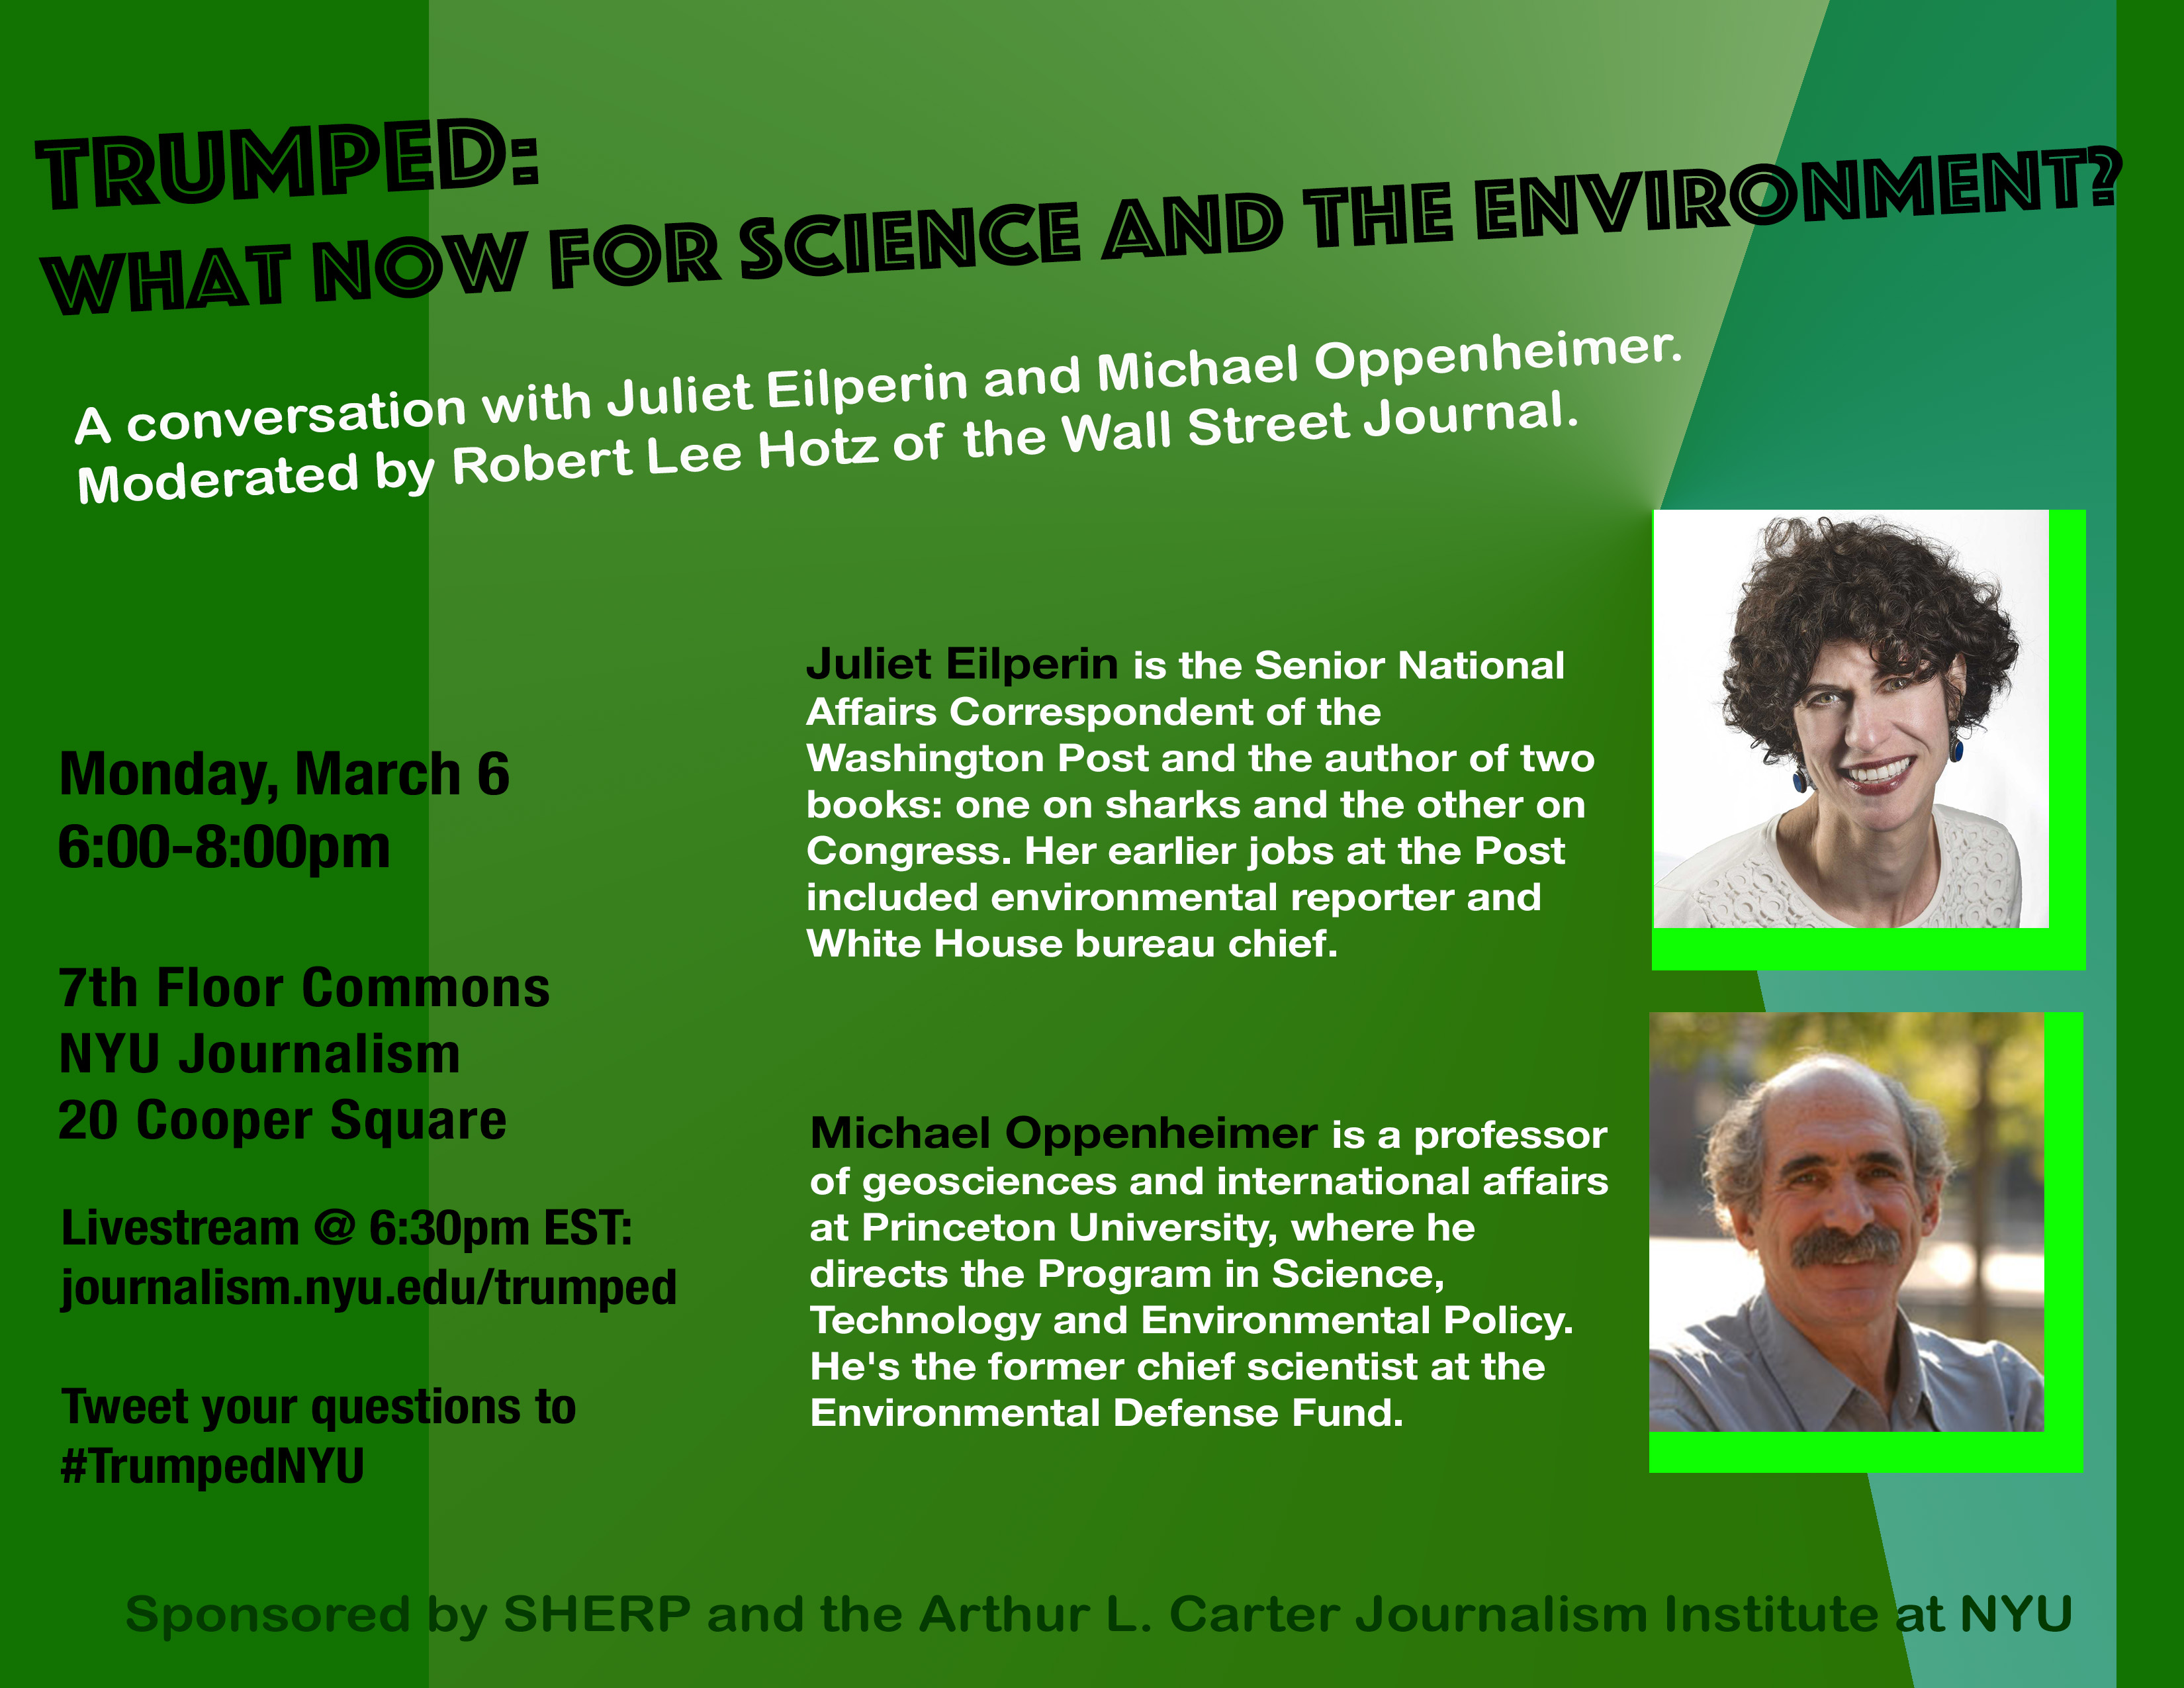 Trumped: What Now for Science and the Environment? - Event Poster 6 Mar 2017